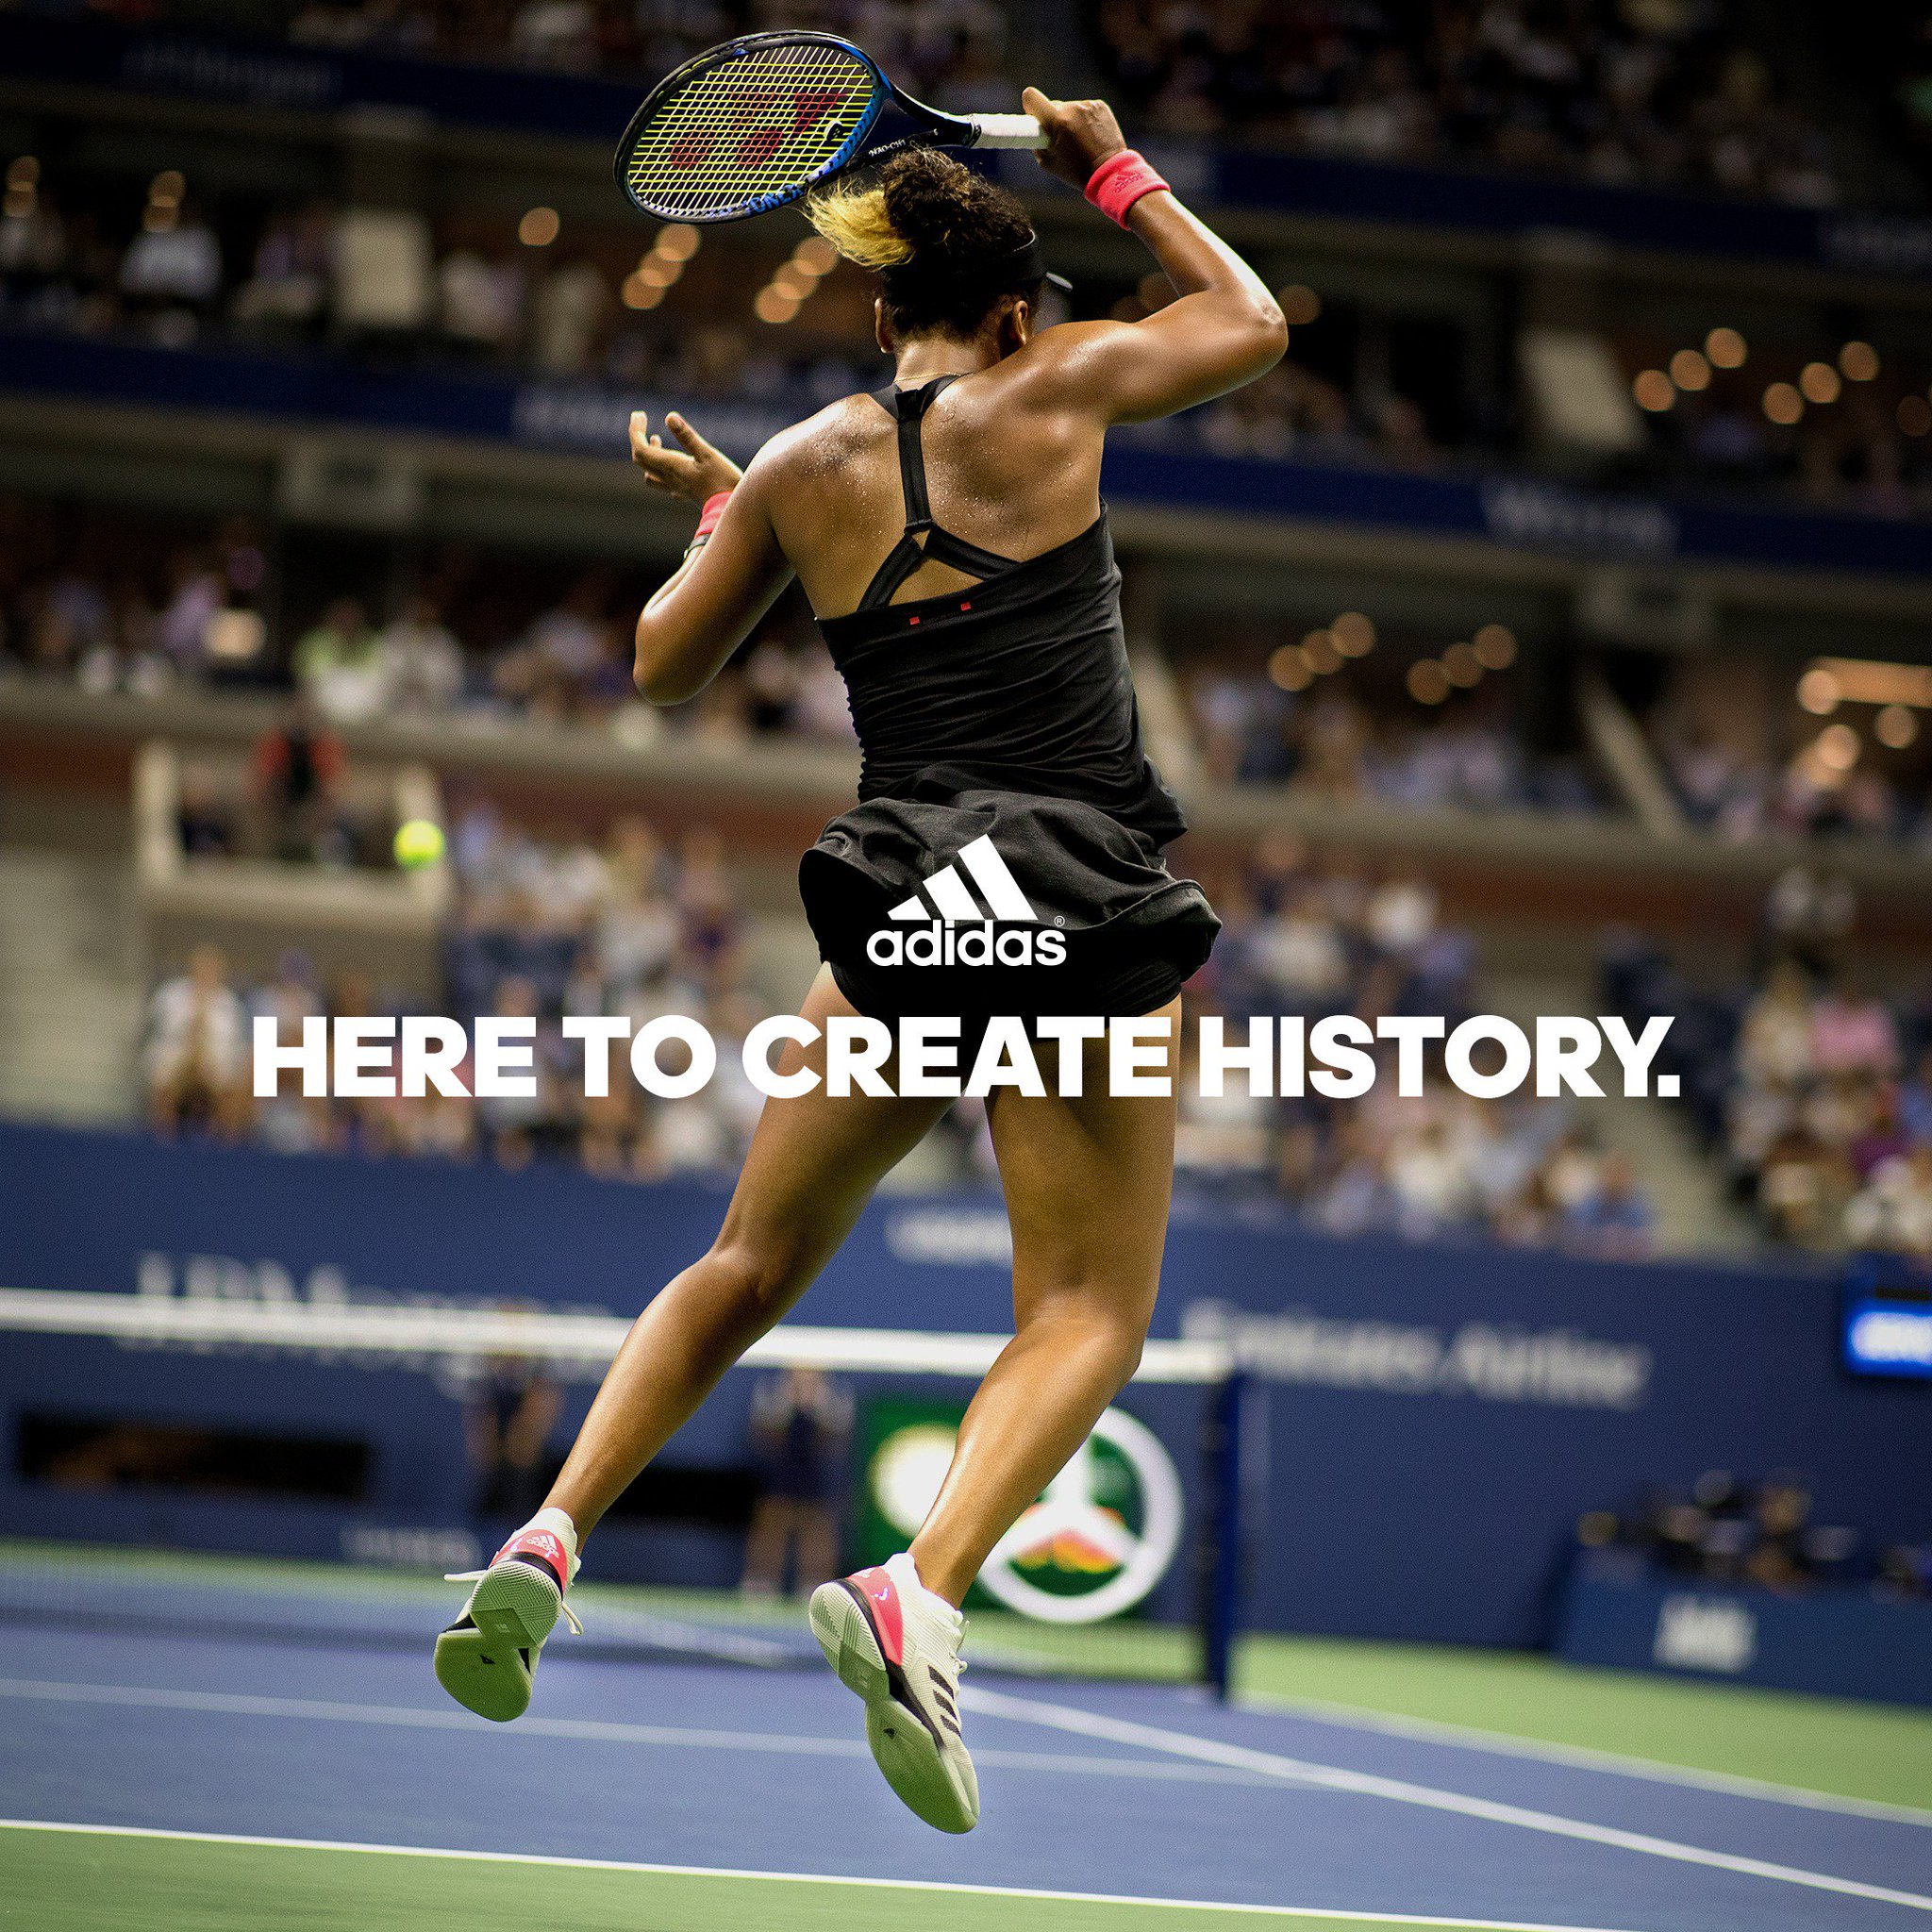 adidas on Twitter: "Here To Create History. @Naomi_Osaka_, Japan's first ever Slam Champion. https://t.co/R0oelXRUrk" / Twitter